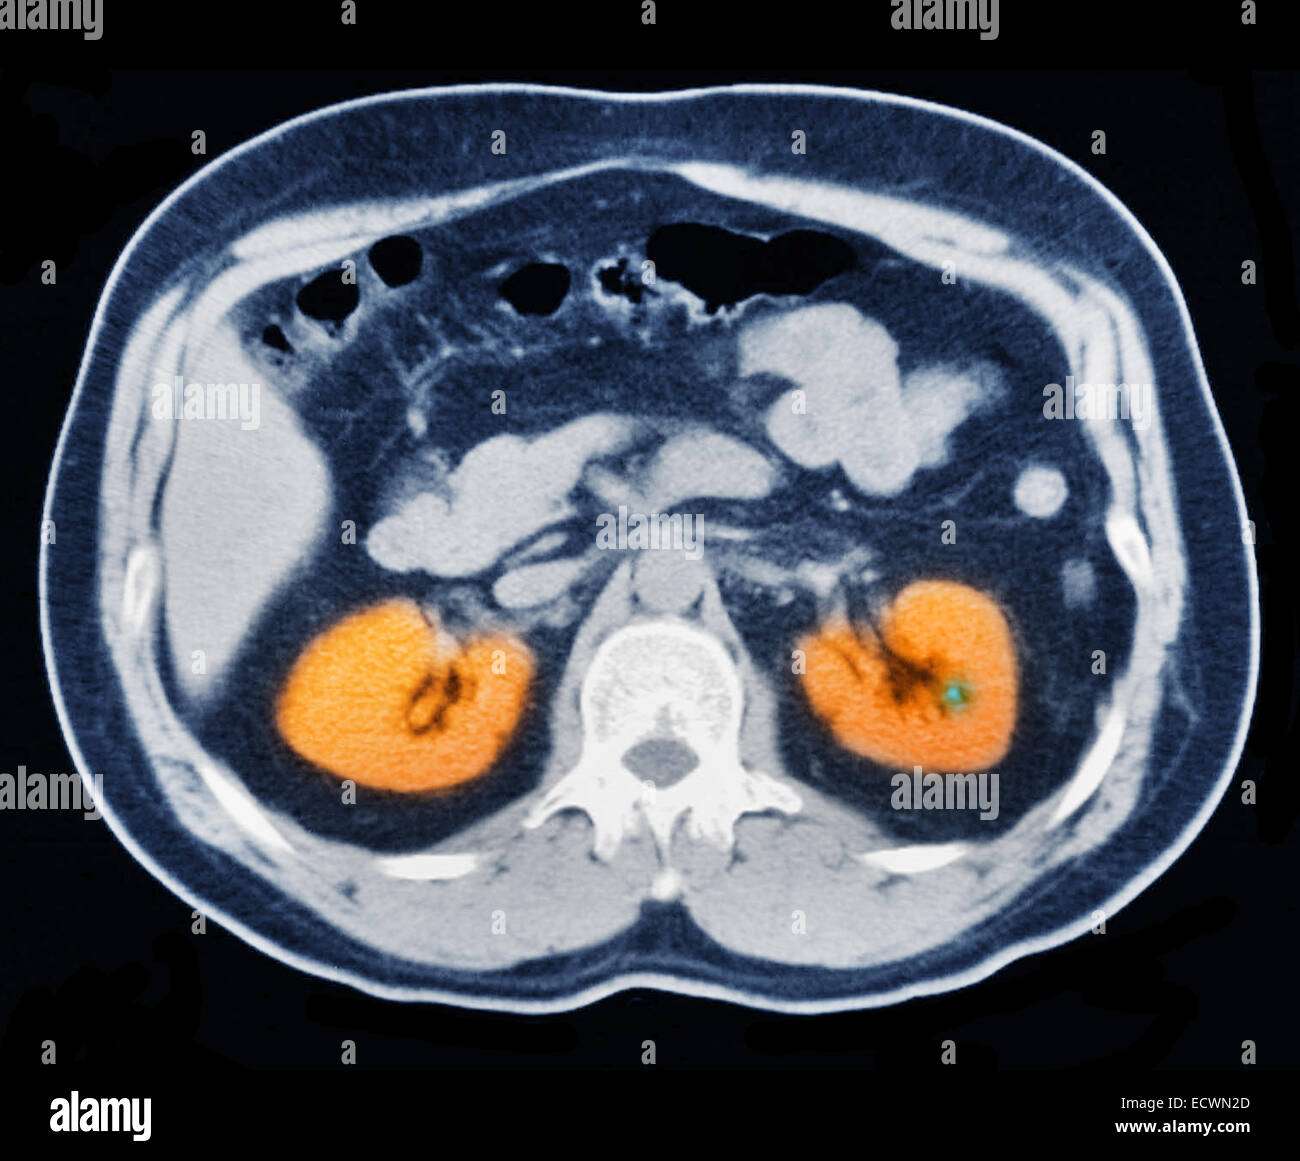 What Do Kidney Stones Look Like On A Ct Scan